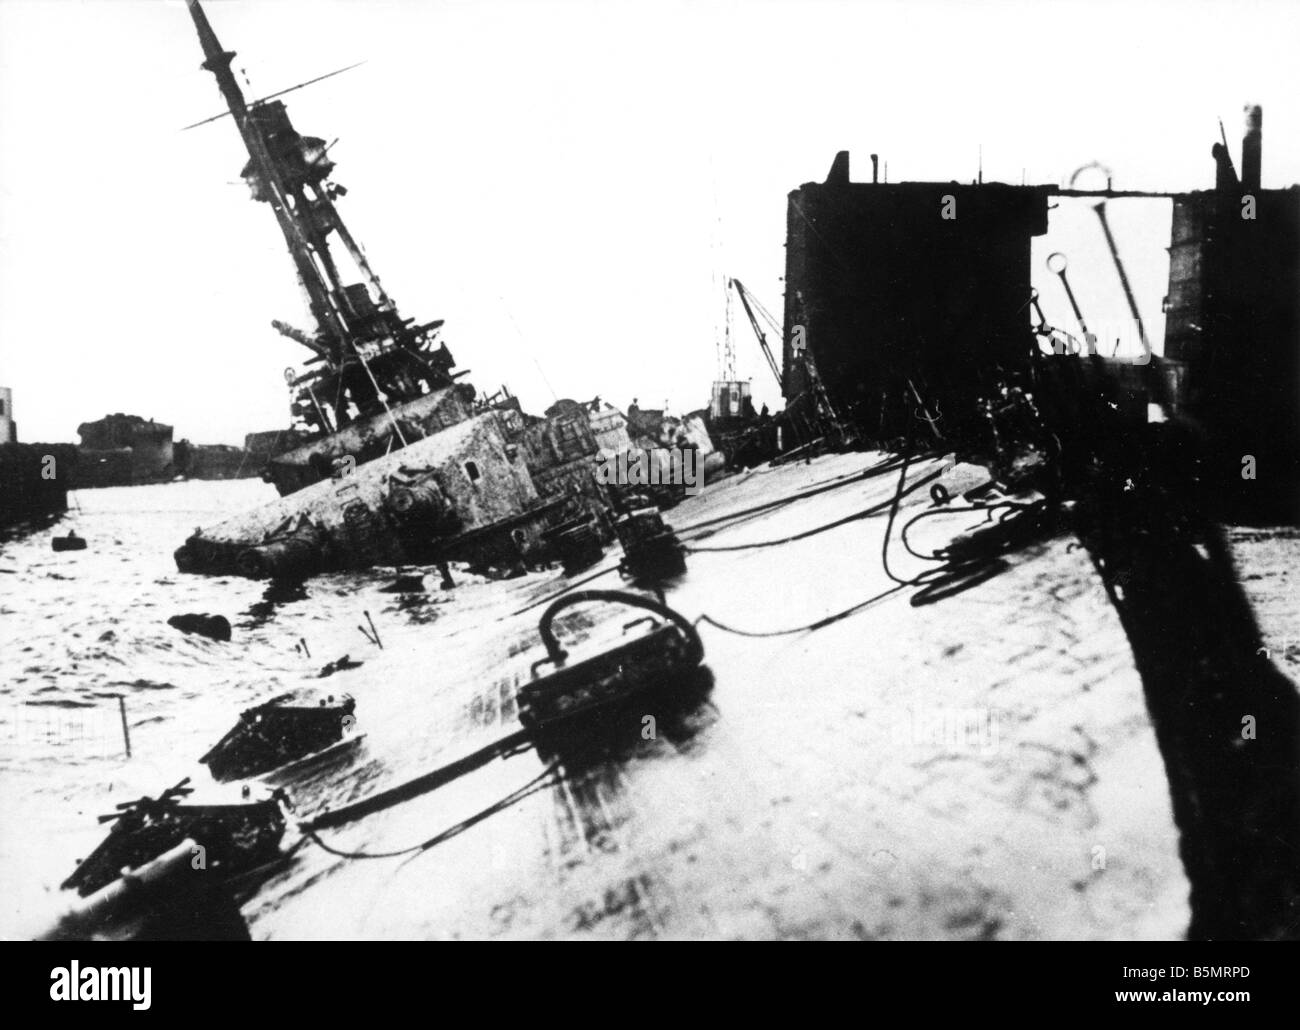 9 1919 6 21 A1 2 Scuttling at Scapa Flow Photo History of Germany 21 6 1919 Scuttling of the German fleet at Scapa Flow in the O Stock Photo